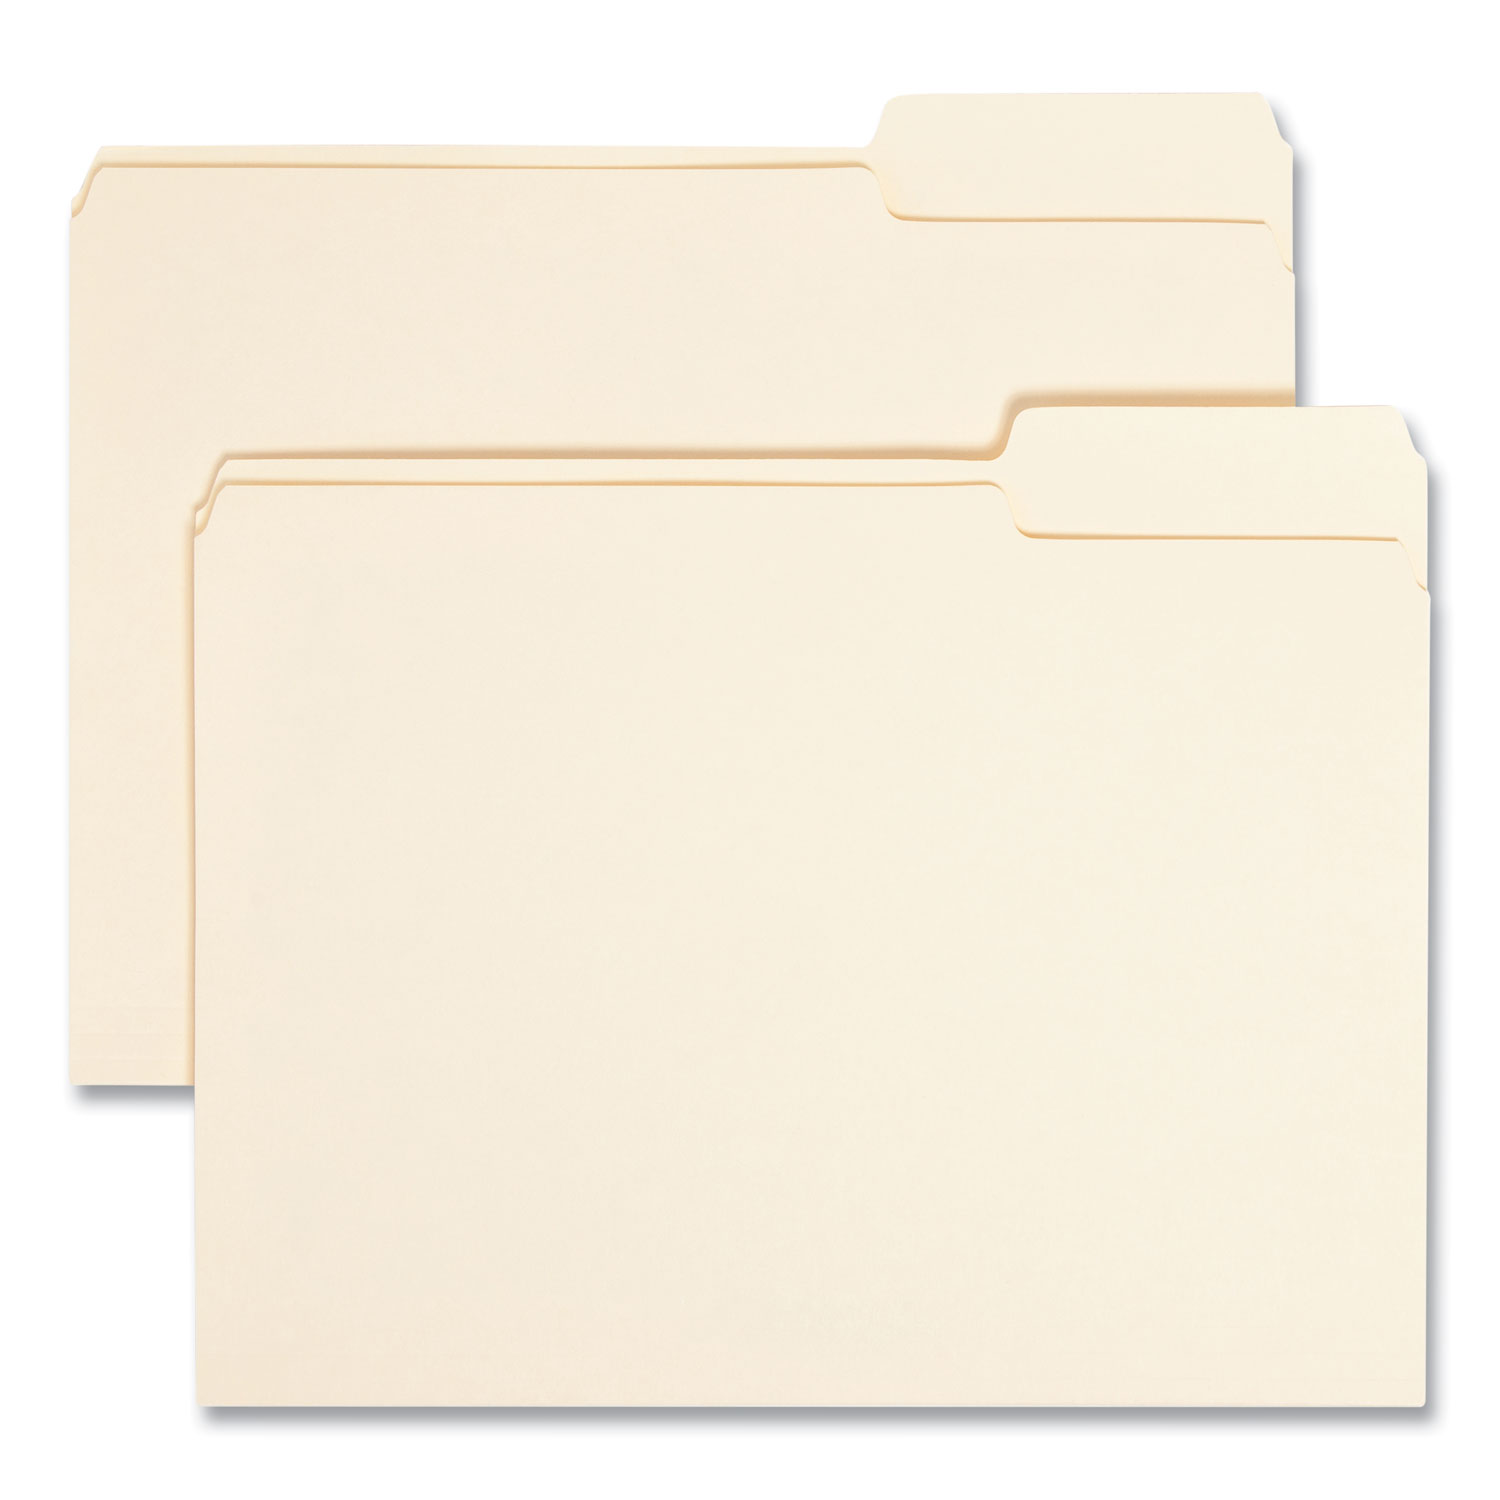 Set of 3 A4 Documents Folder with Pockets, Rubber Band, Pen and Memo Holders